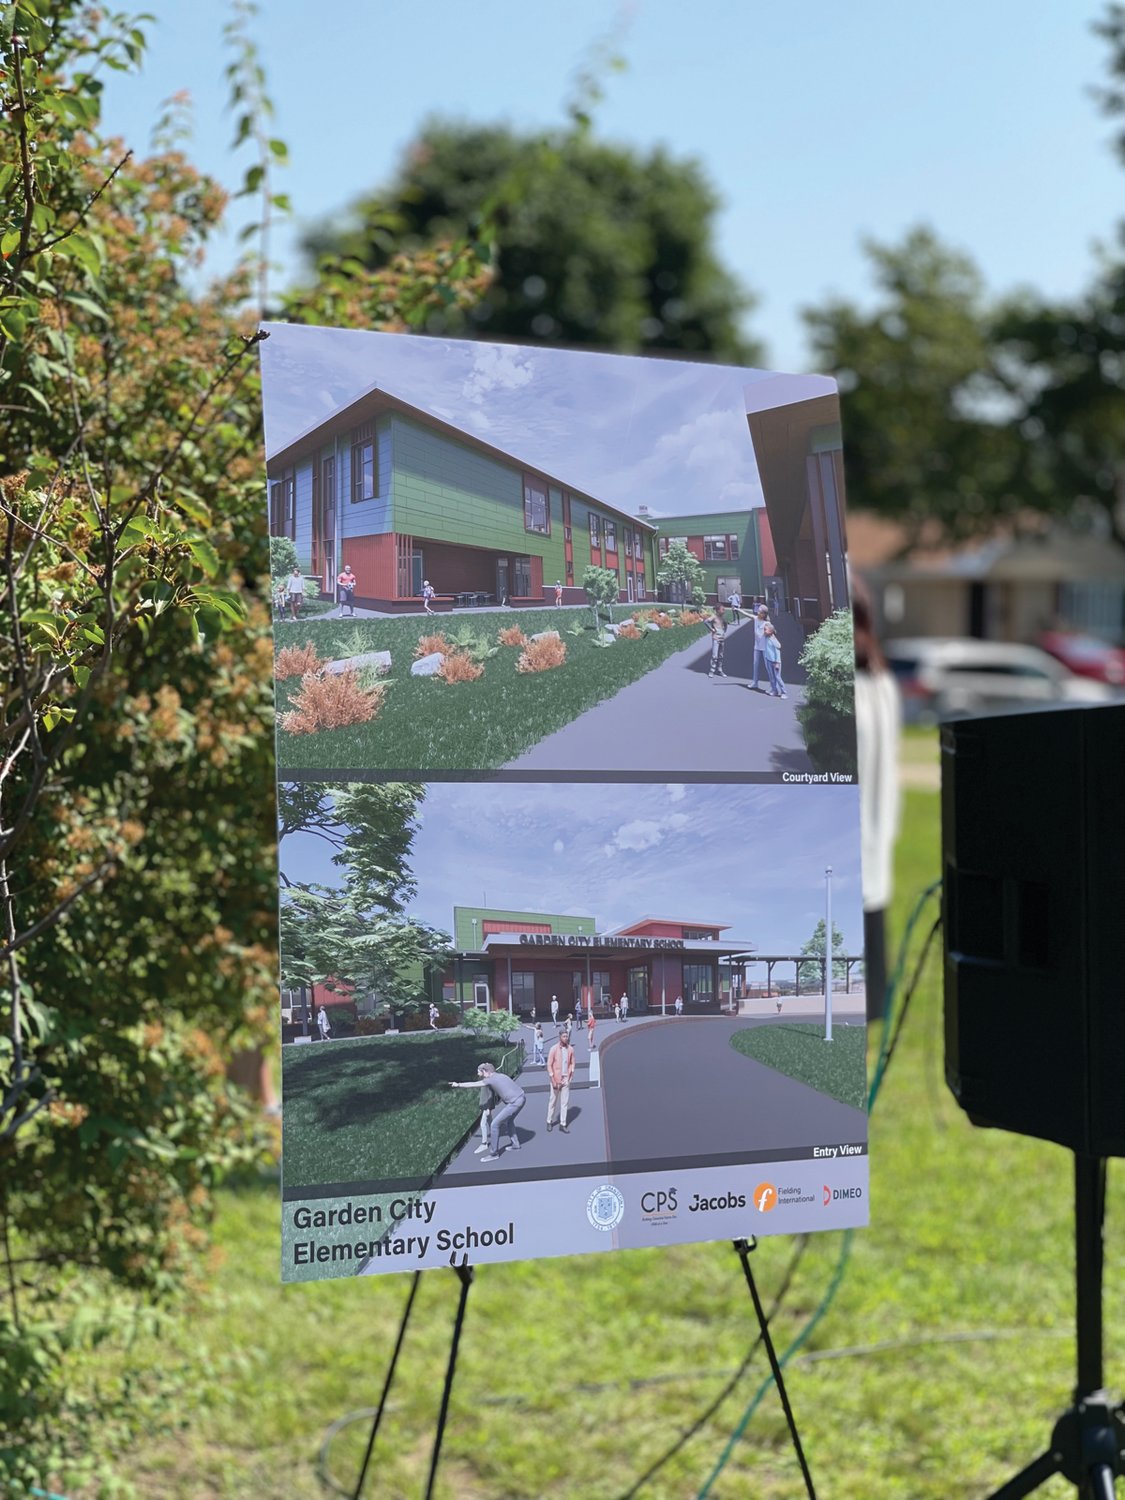 WHAT’S IN STORE: Renderings of how the new Garden City School will look inside and out greeted visitors during last week’s ceremony.